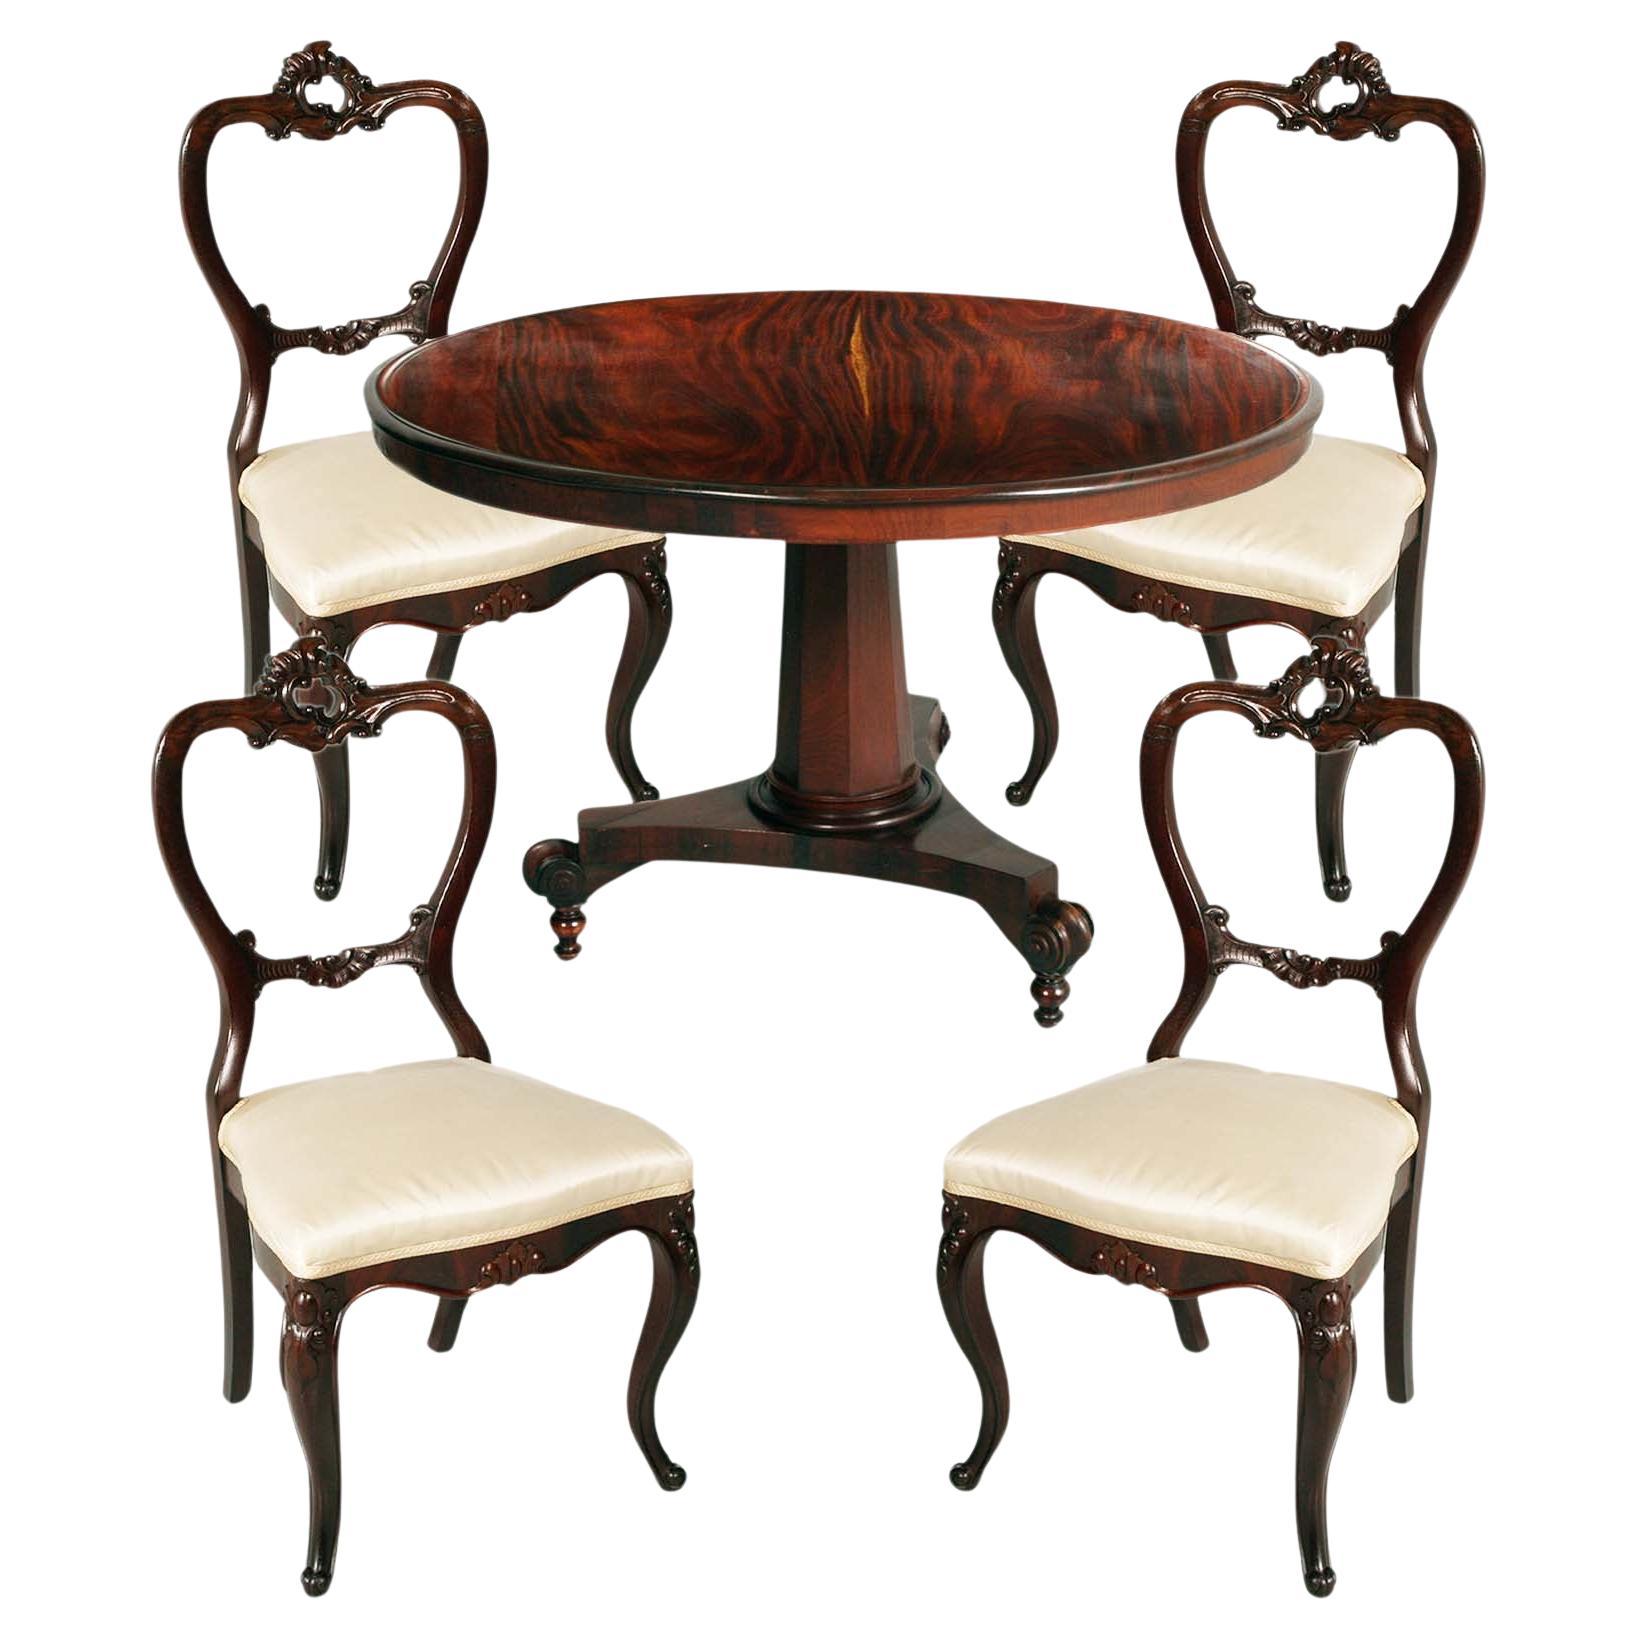  19th Century French Mahogany Table Empire style with Louis Philippe four Chairs